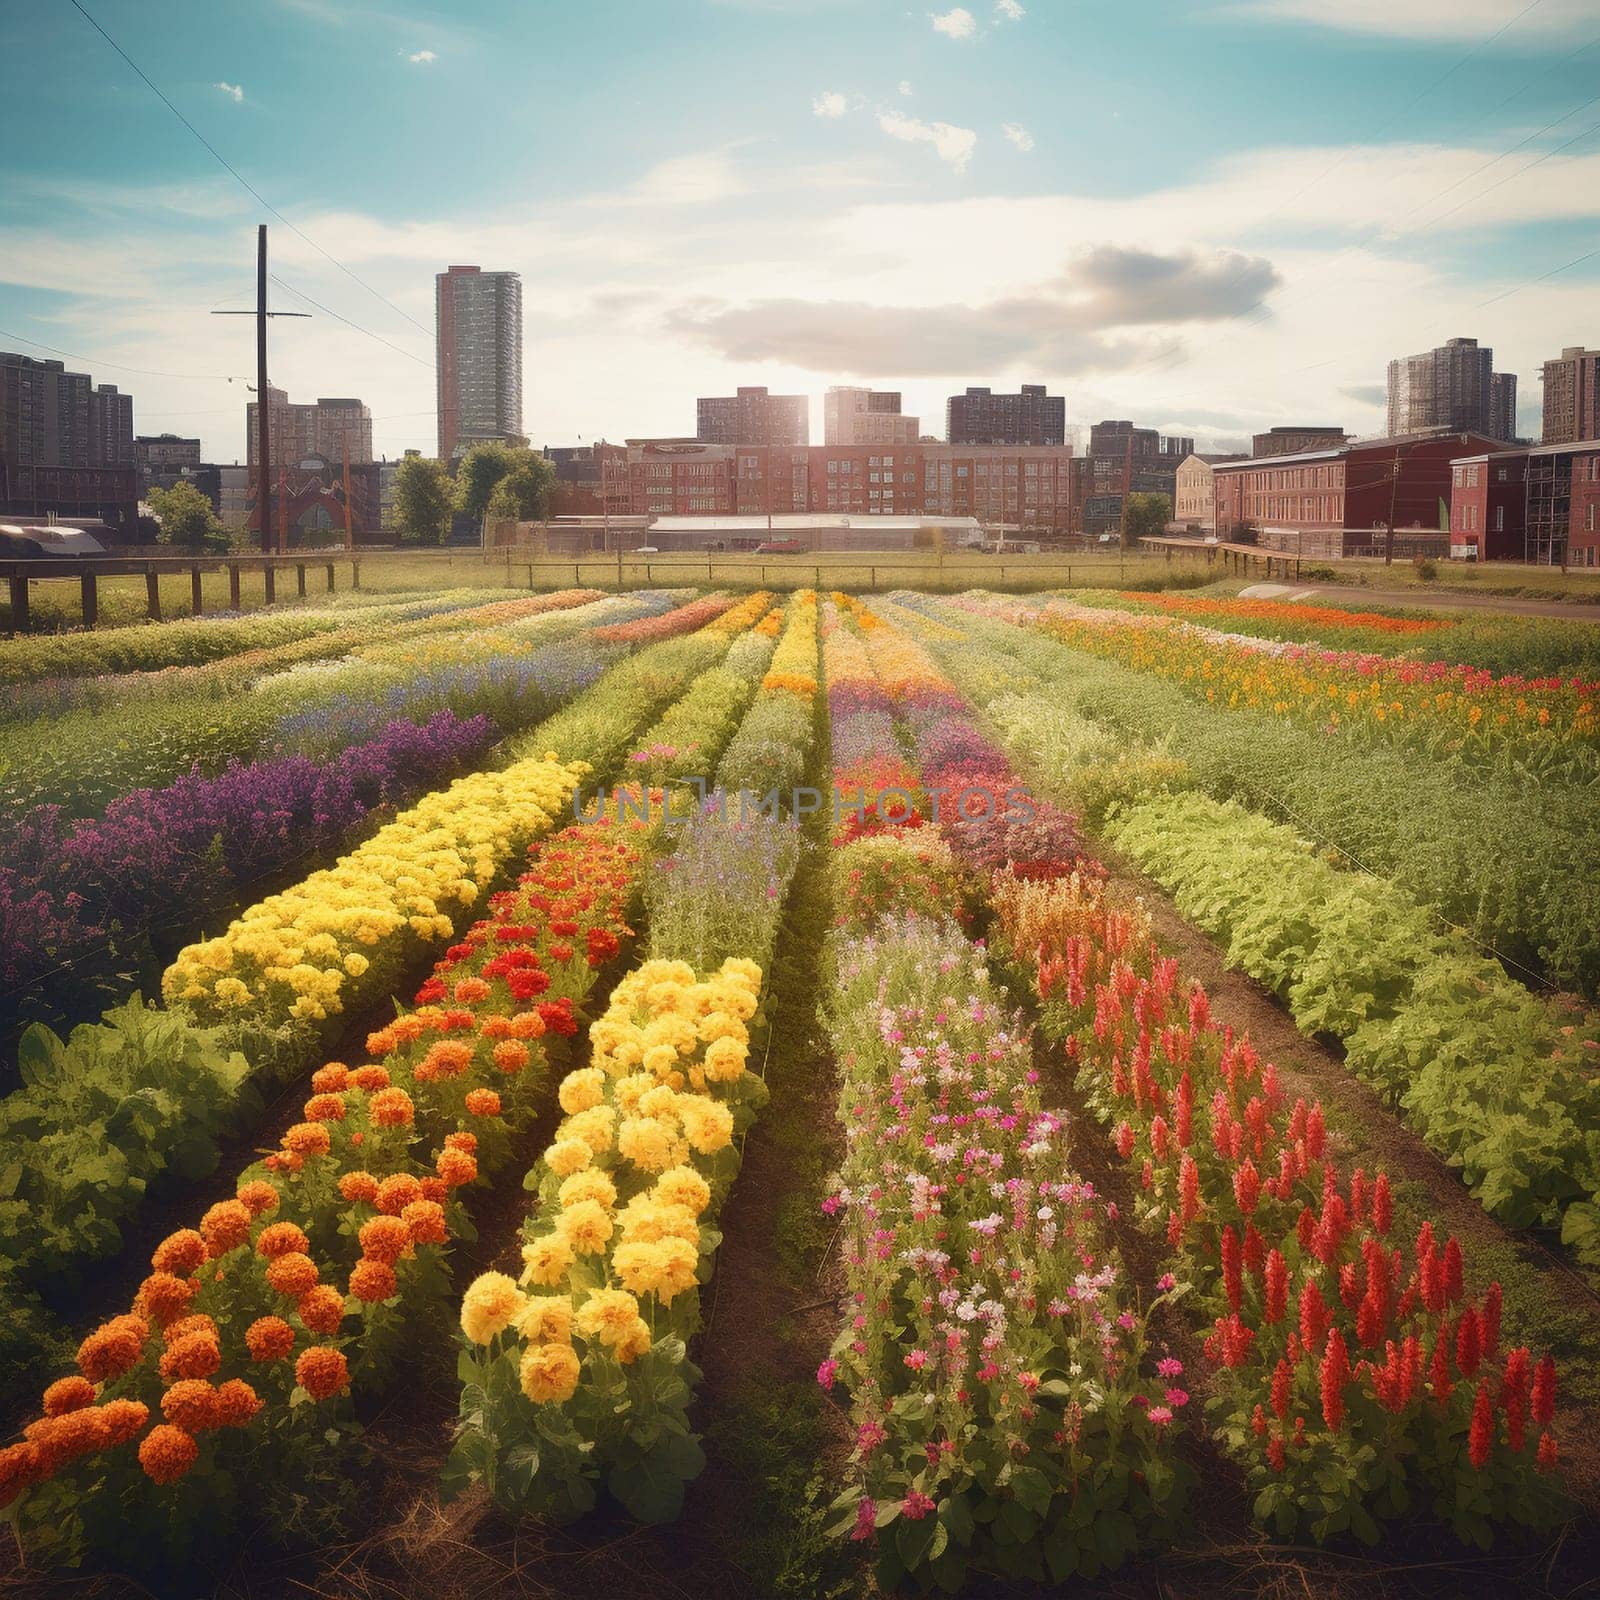 This image captures the beauty and vitality of urban gardening, showing a flower farm growing in the heart of the city, with rows of colorful flowers stretching out as far as the eye can see. The farm is a testament to the power of urban gardening to bring beauty and joy to people in even the most unlikely places, and the image conveys the sense of abundance and vitality that comes from growing plants in an urban environment.